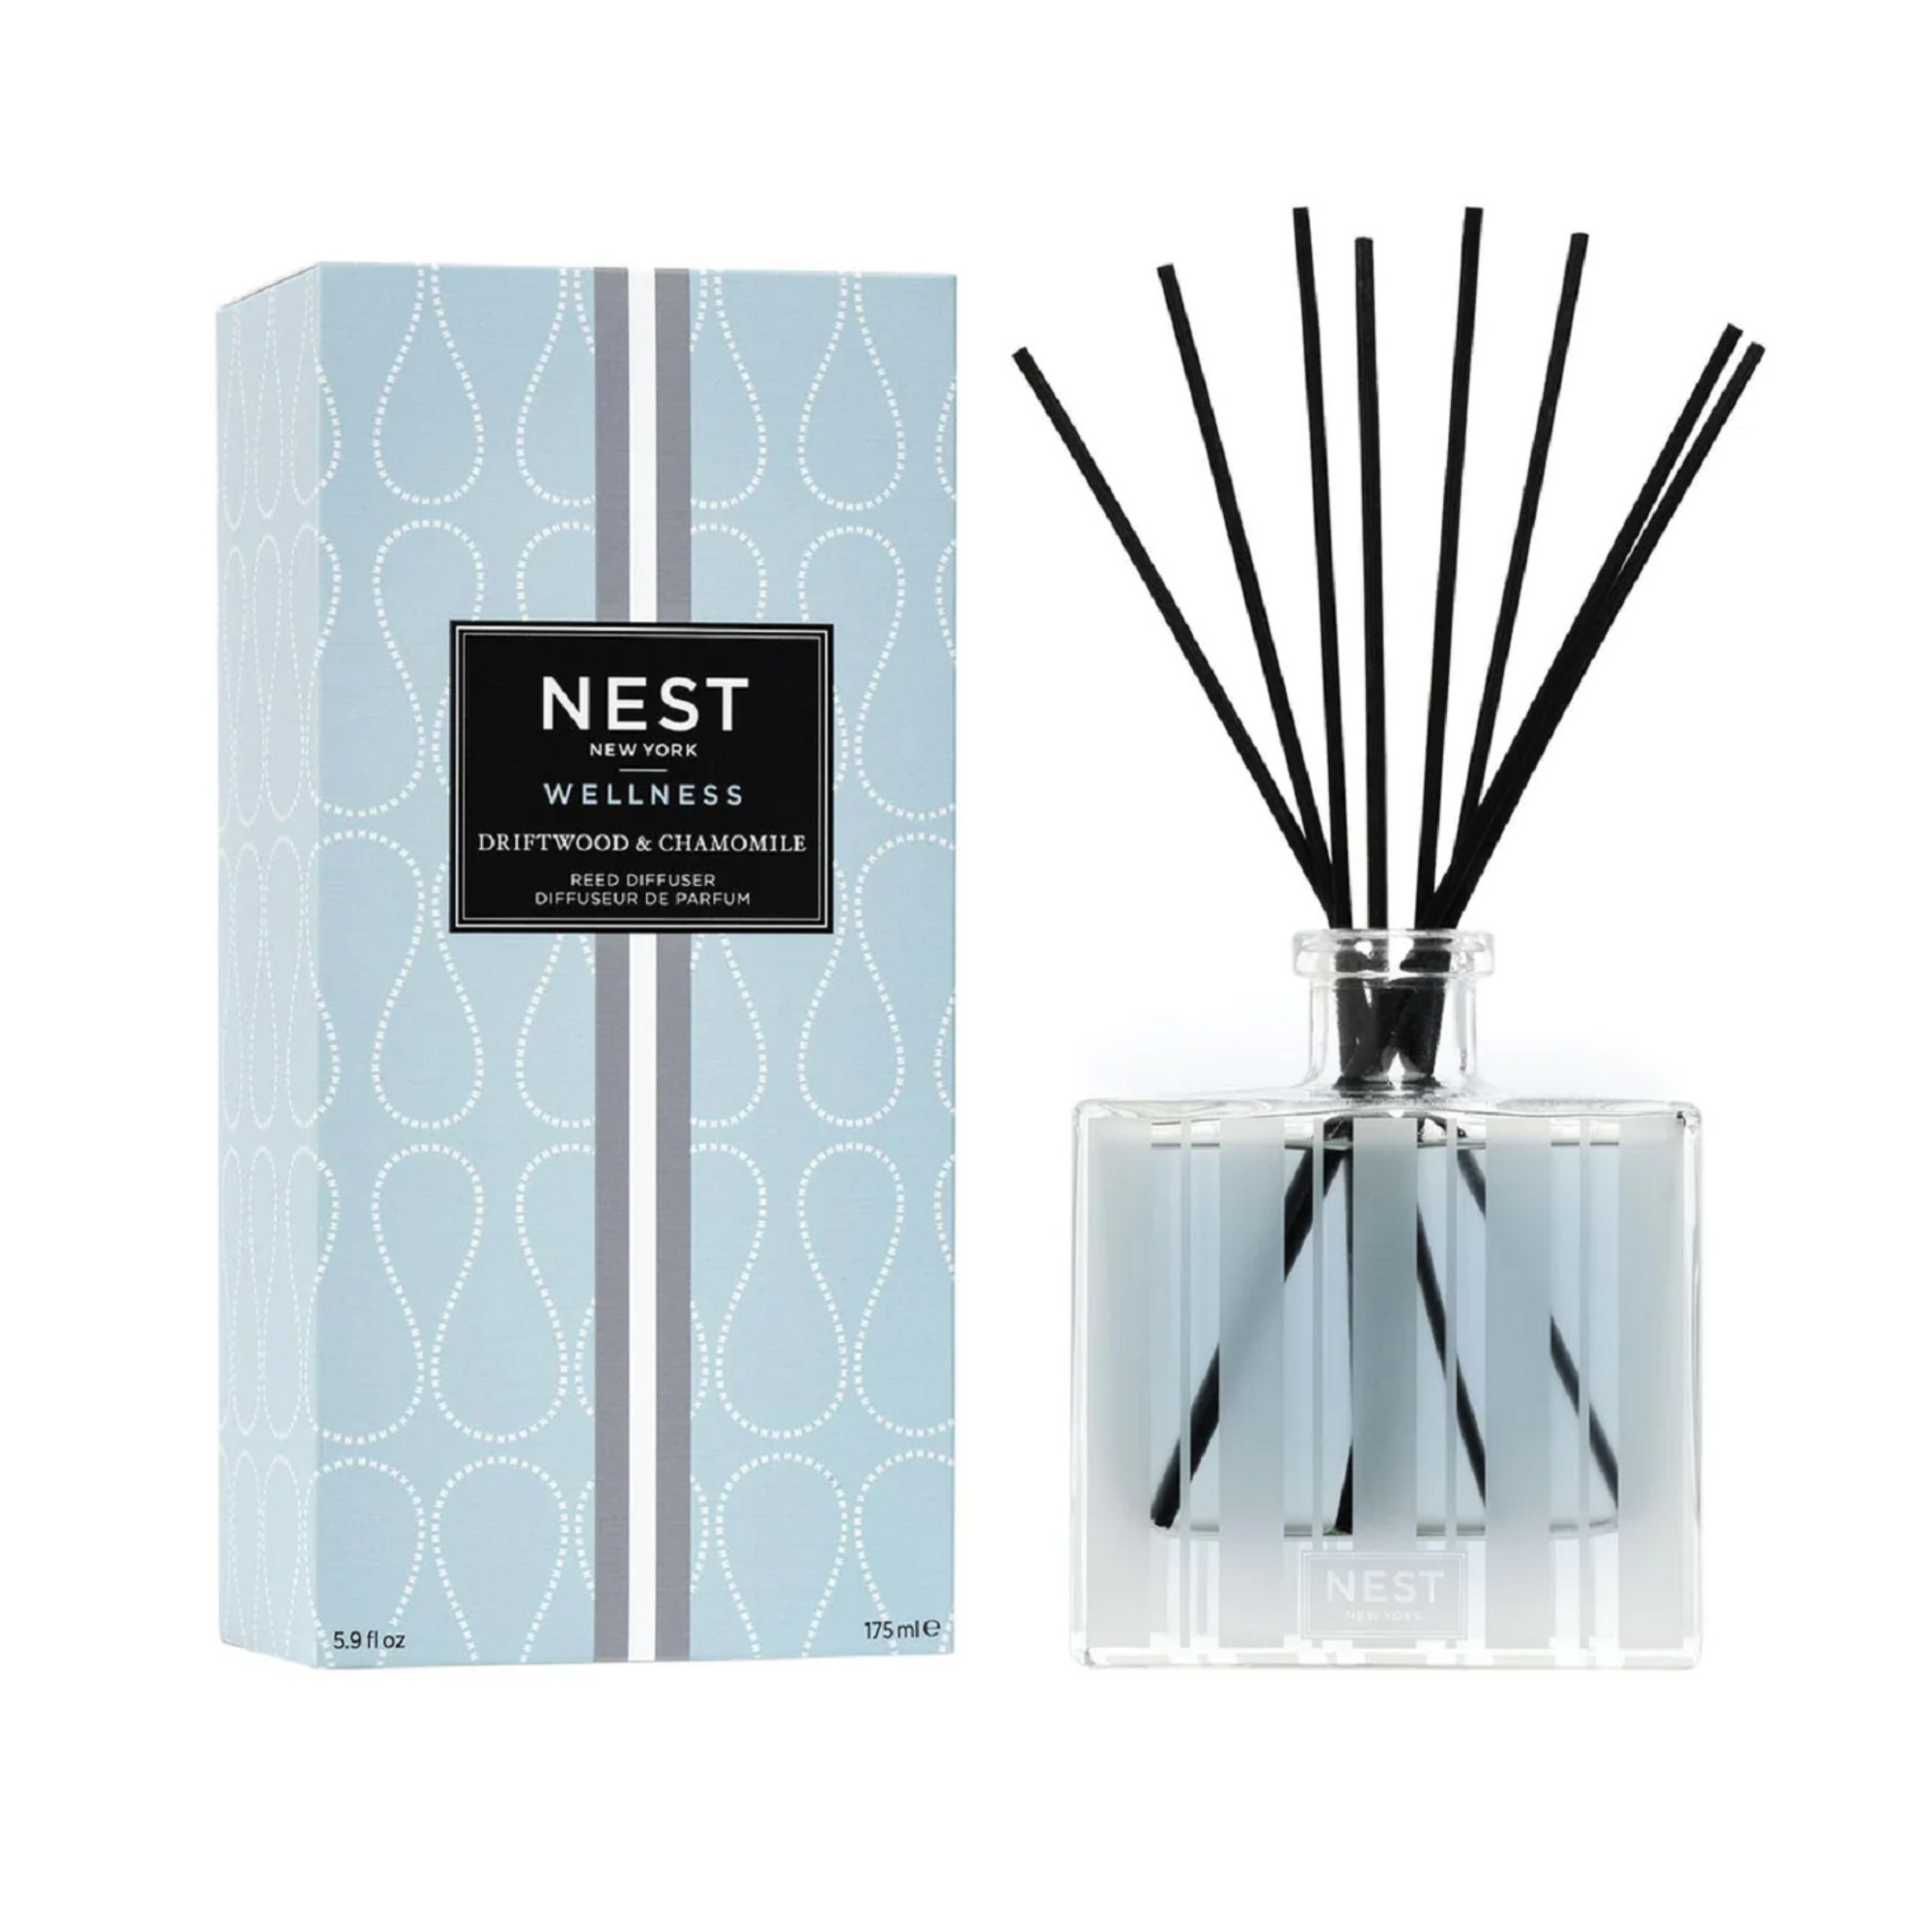 Product Image of Nest New York’s Driftwood and Chamomile Reed Diffuser with Box